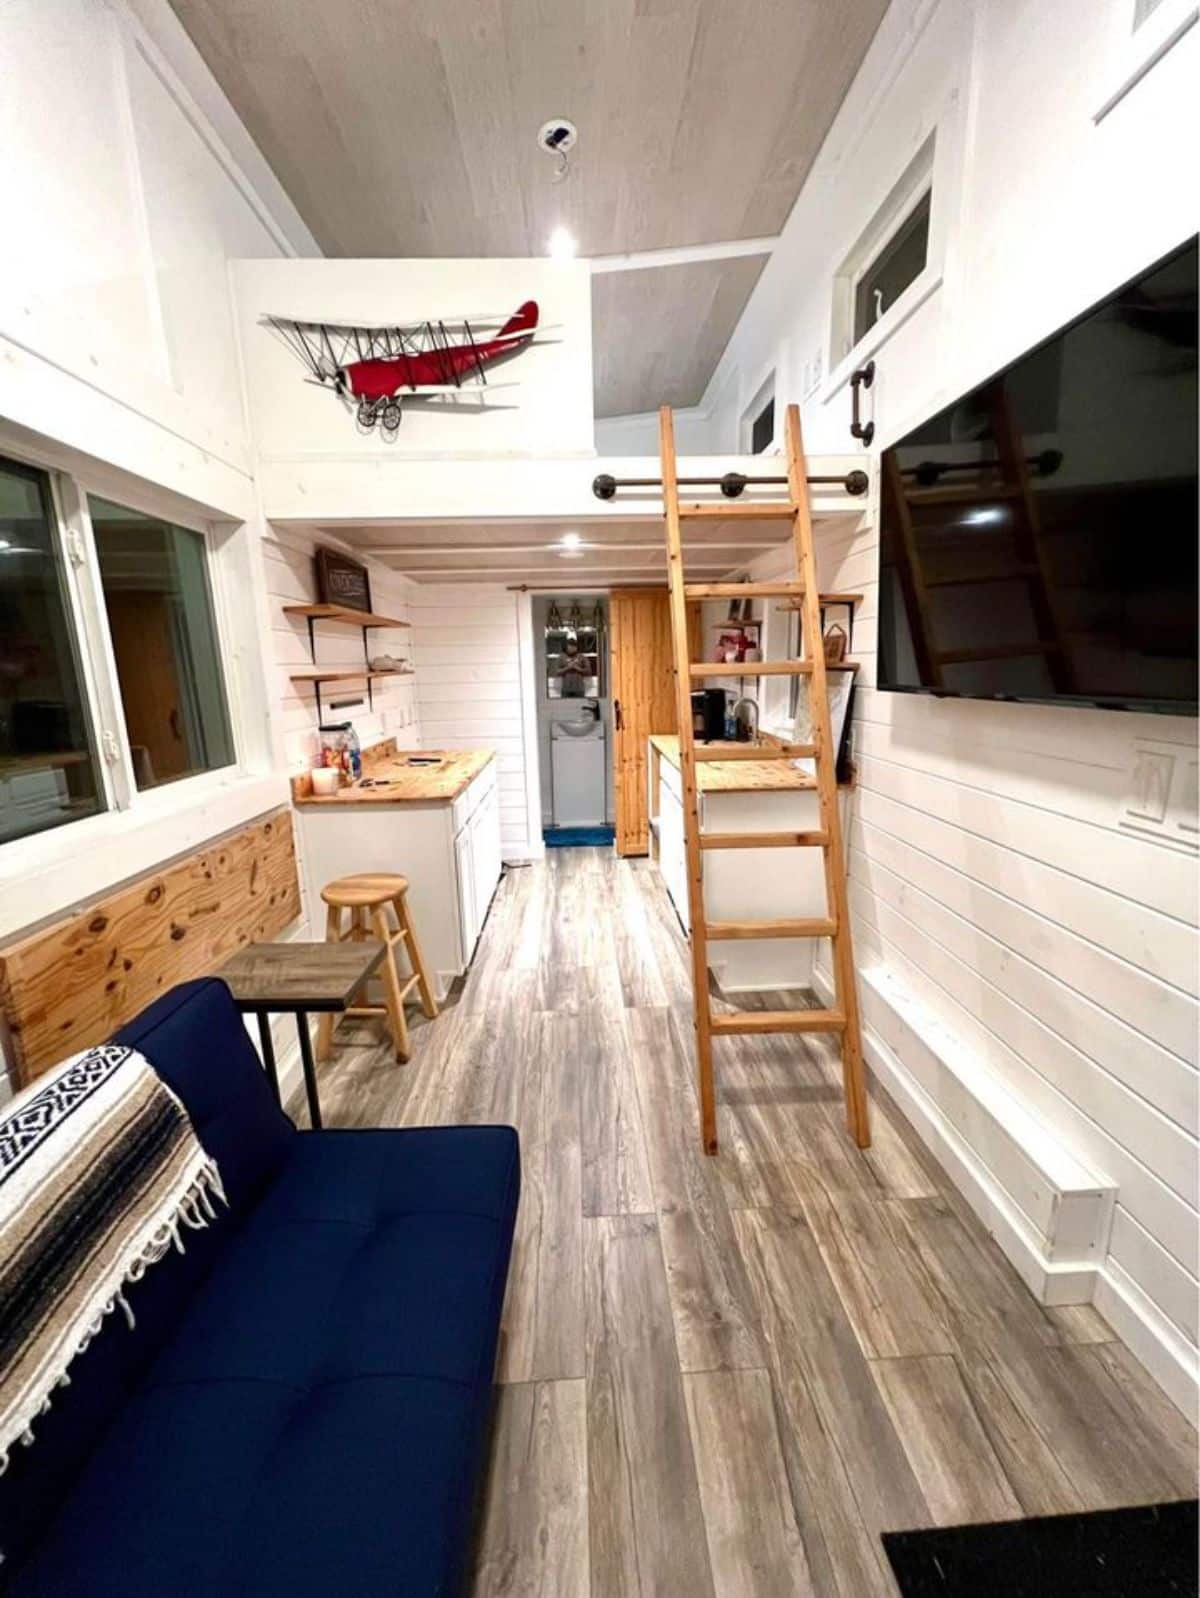 Full interiors of 240 sf tiny home